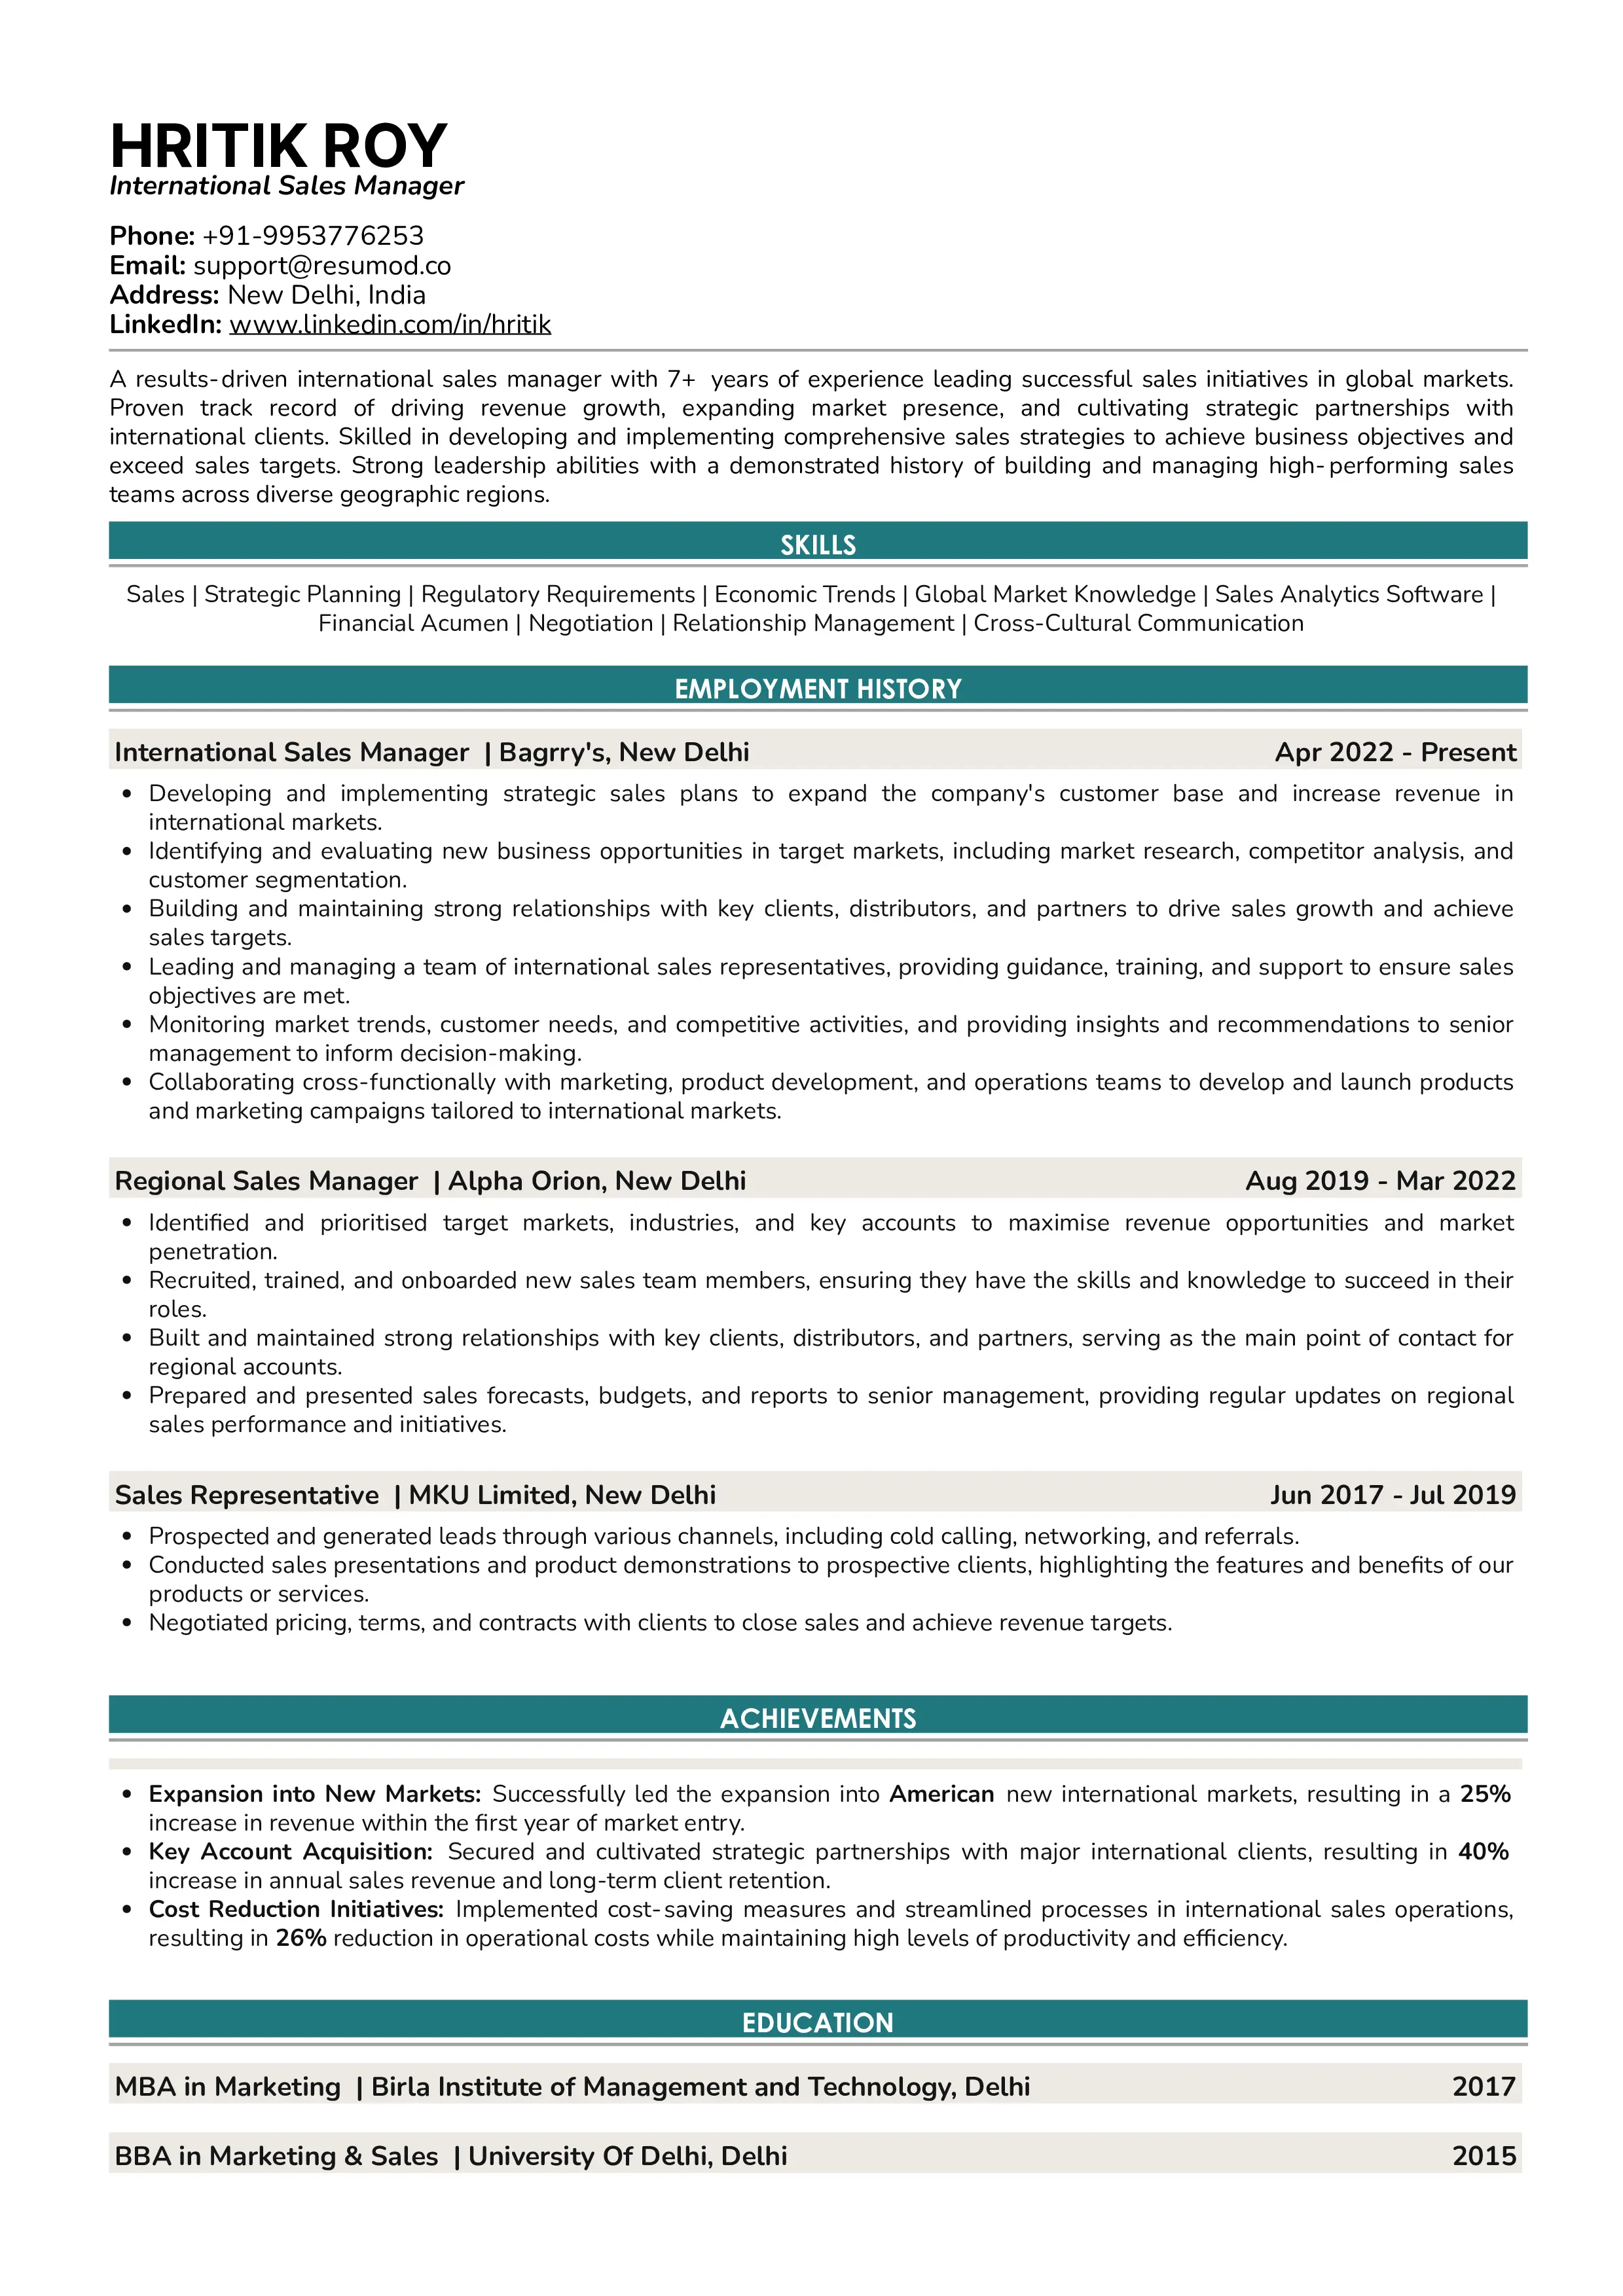 Sample Resume of International Sales Manager | Free Resume Templates & Samples on Resumod.co